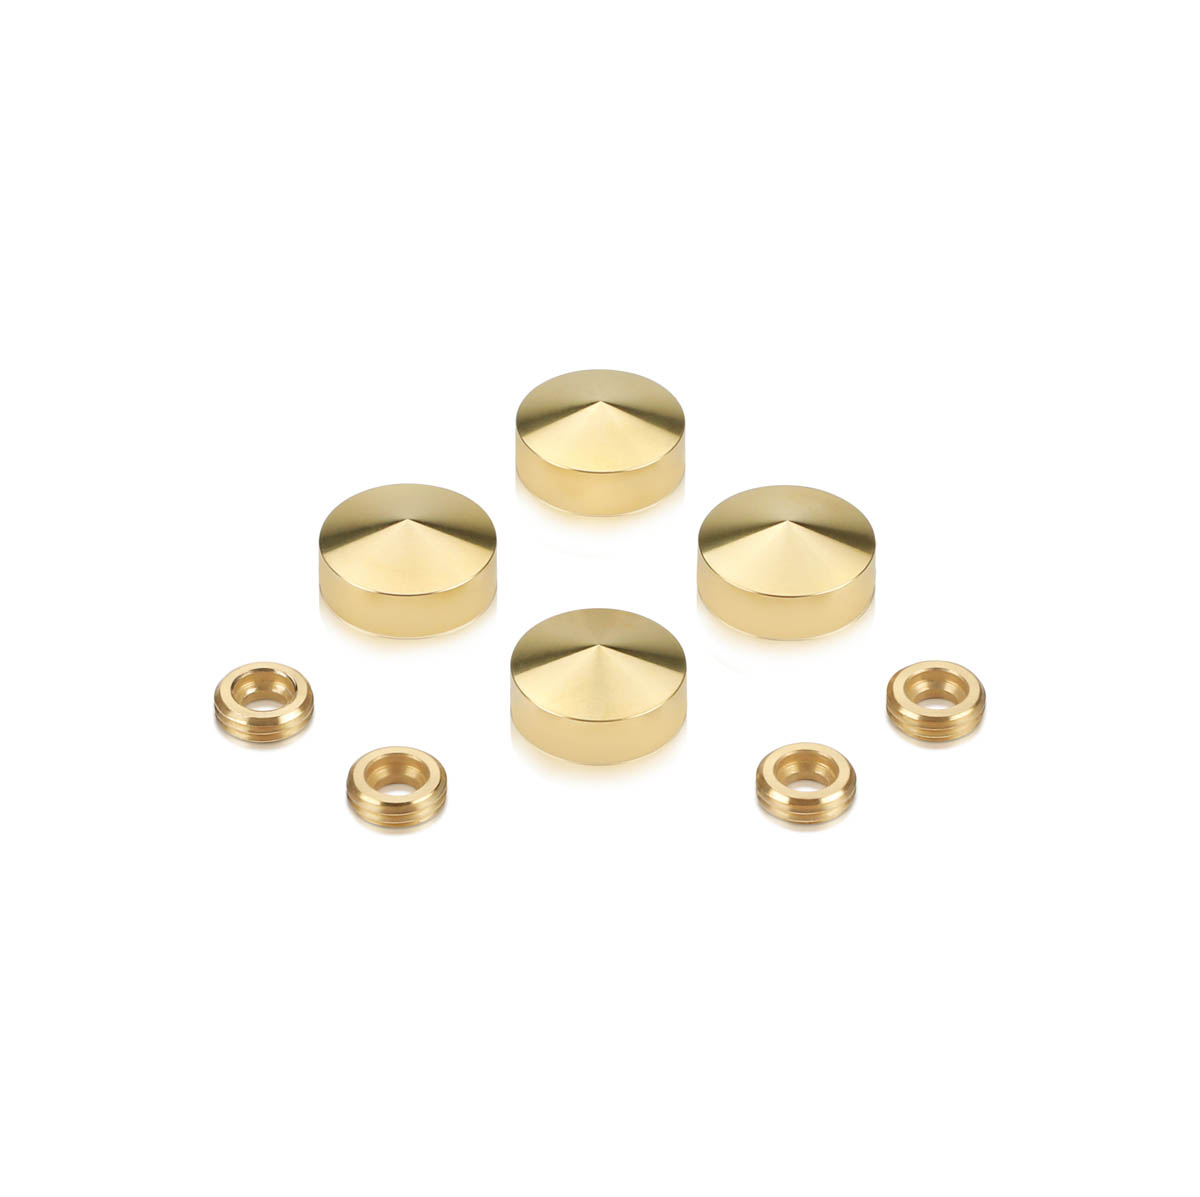 Set of 4 Conical Screw Cover, Diameter: 11/16'' (Less 3/4''), Brass Plain Finish (Indoor or Outdoor Use, but for outdoor use Brass will come darker if no varnish applied)